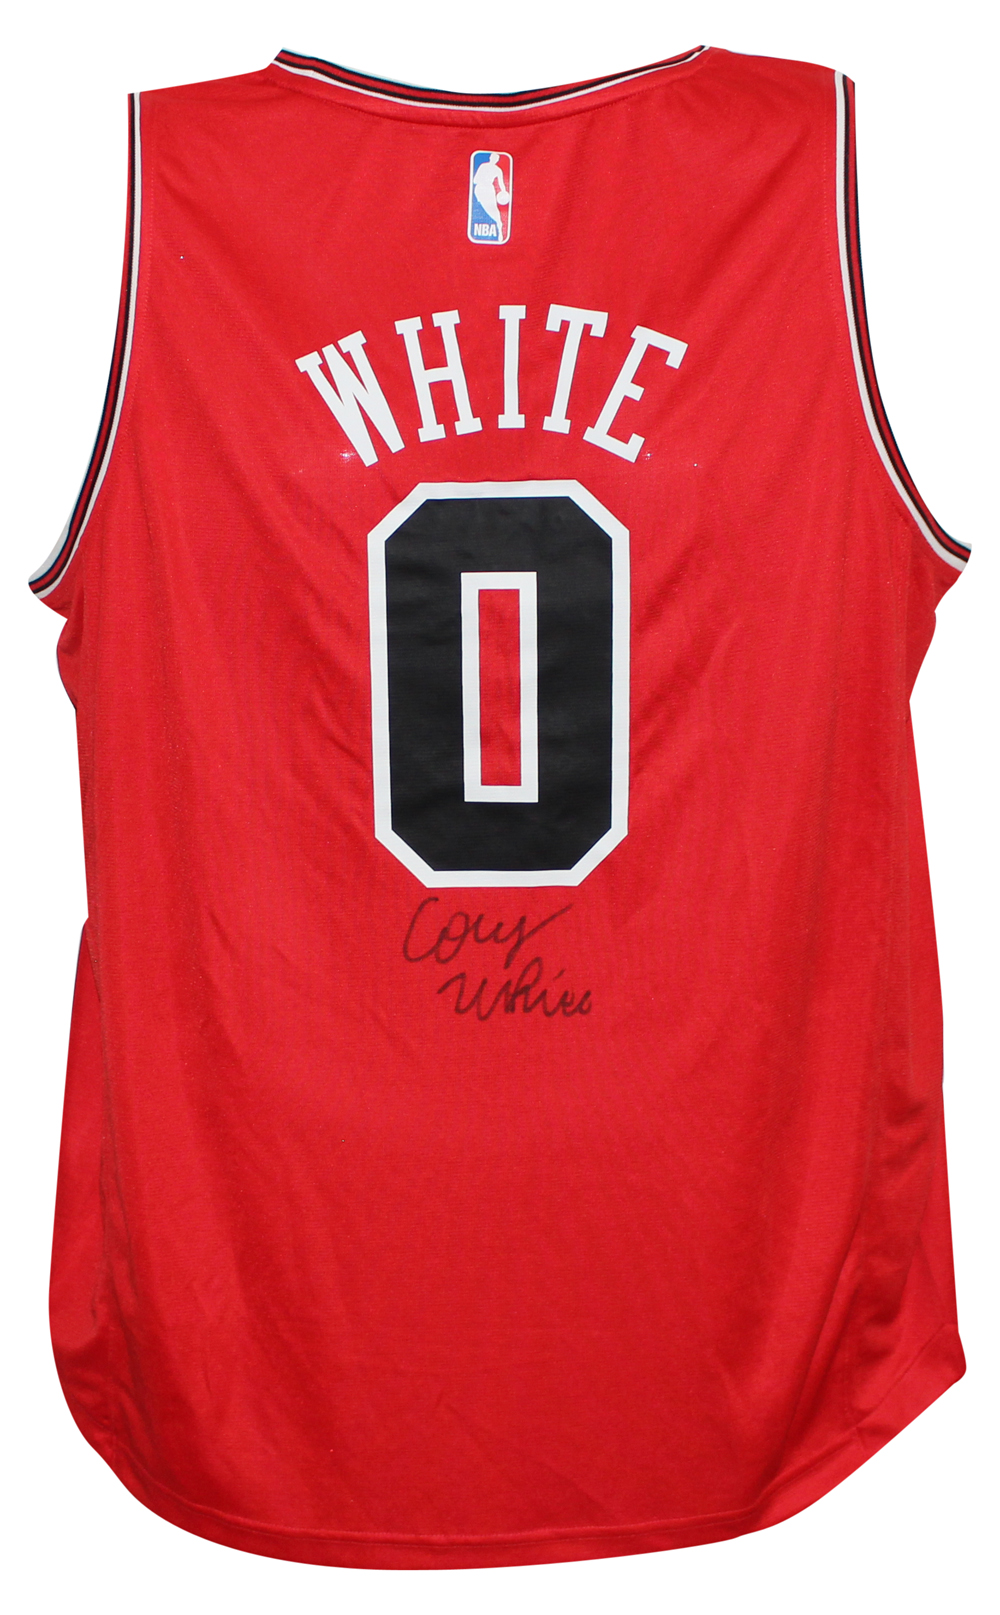 Coby White Autographed Chicago Bulls Red Jersey Full Signature FAN